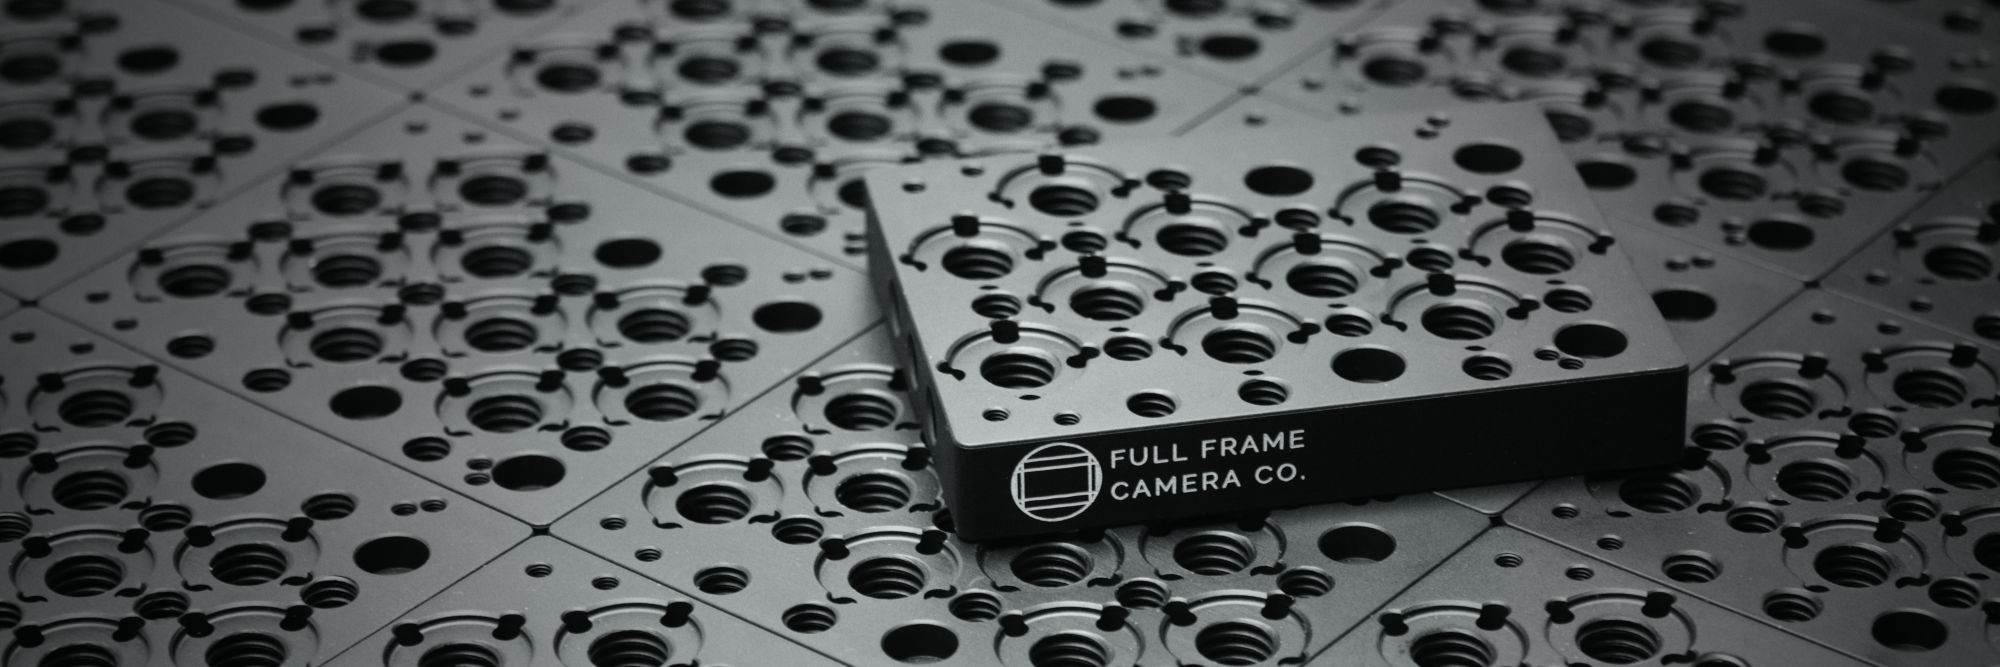 Camera Cheese Plate, by Full Frame Camera Co